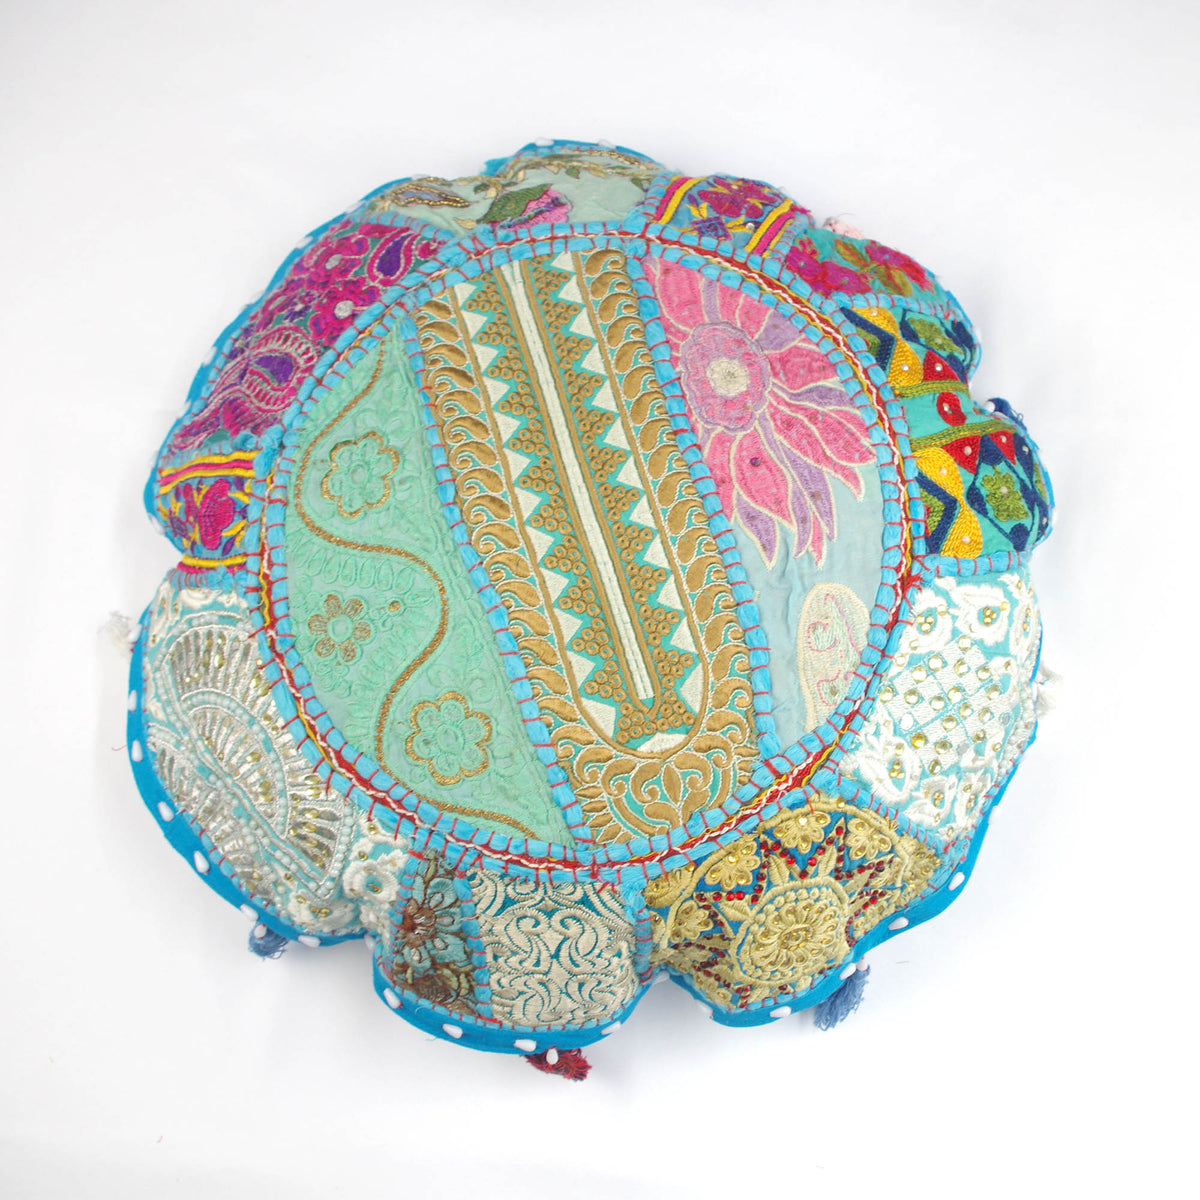 SkyBlue With Pink Flower Round Floor Embroidered Patchwork Pouf Ottoman Indian Vintage Cushion Cover 18"